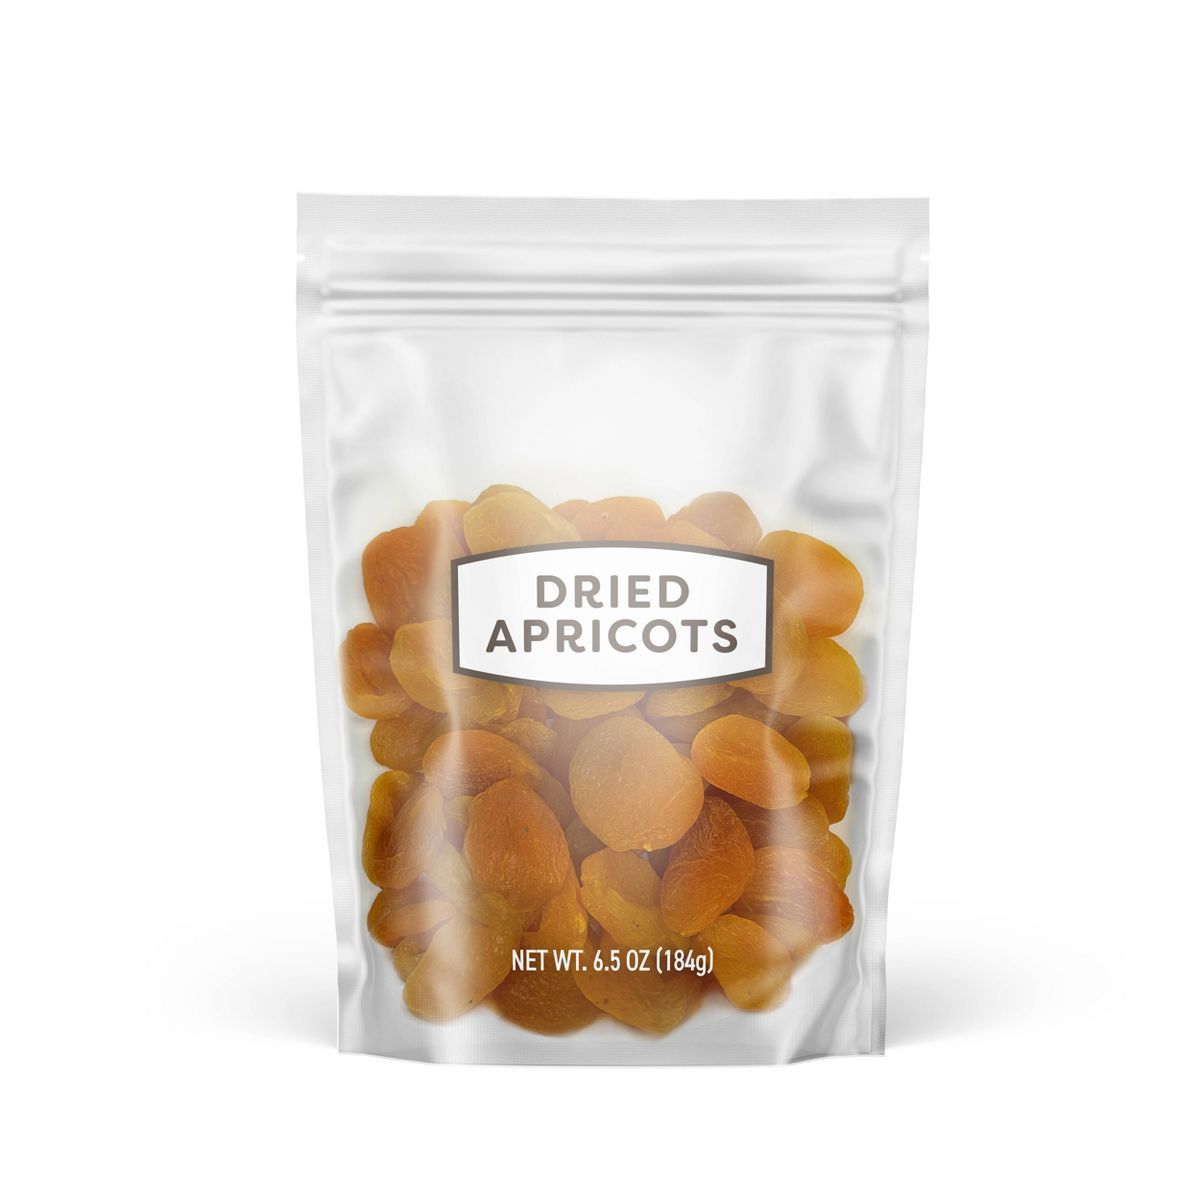 TargetGrocerySnacksDried Fruit & RaisinsDried Apricots - 6.5oz5 out of 5 stars with 13 reviews131... | Target